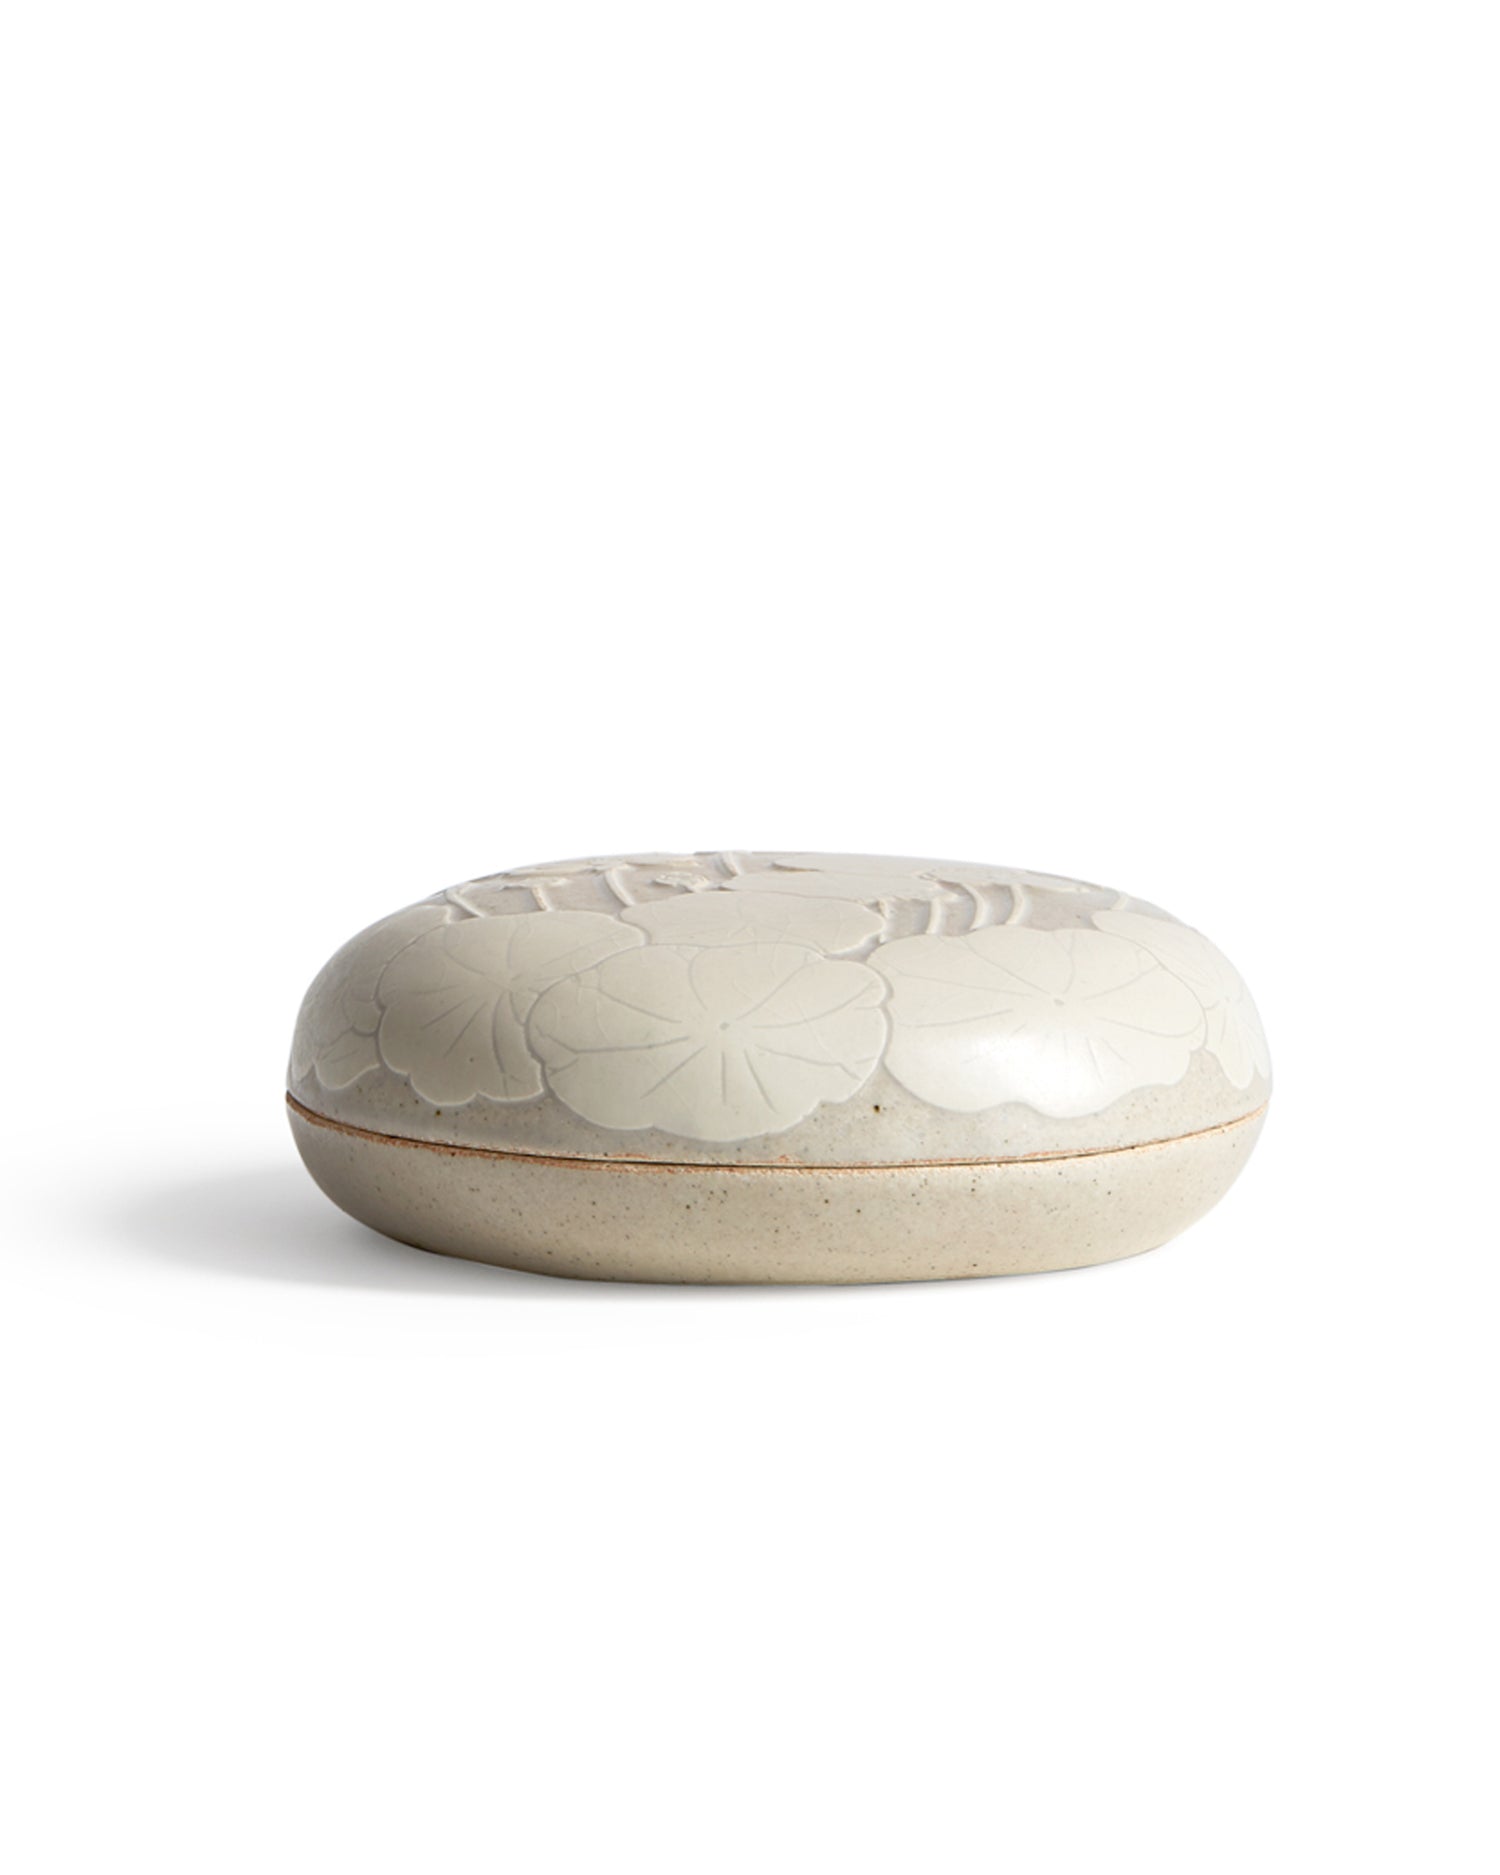 Sgraffito Large Oval Container (OUT OF STOCK)